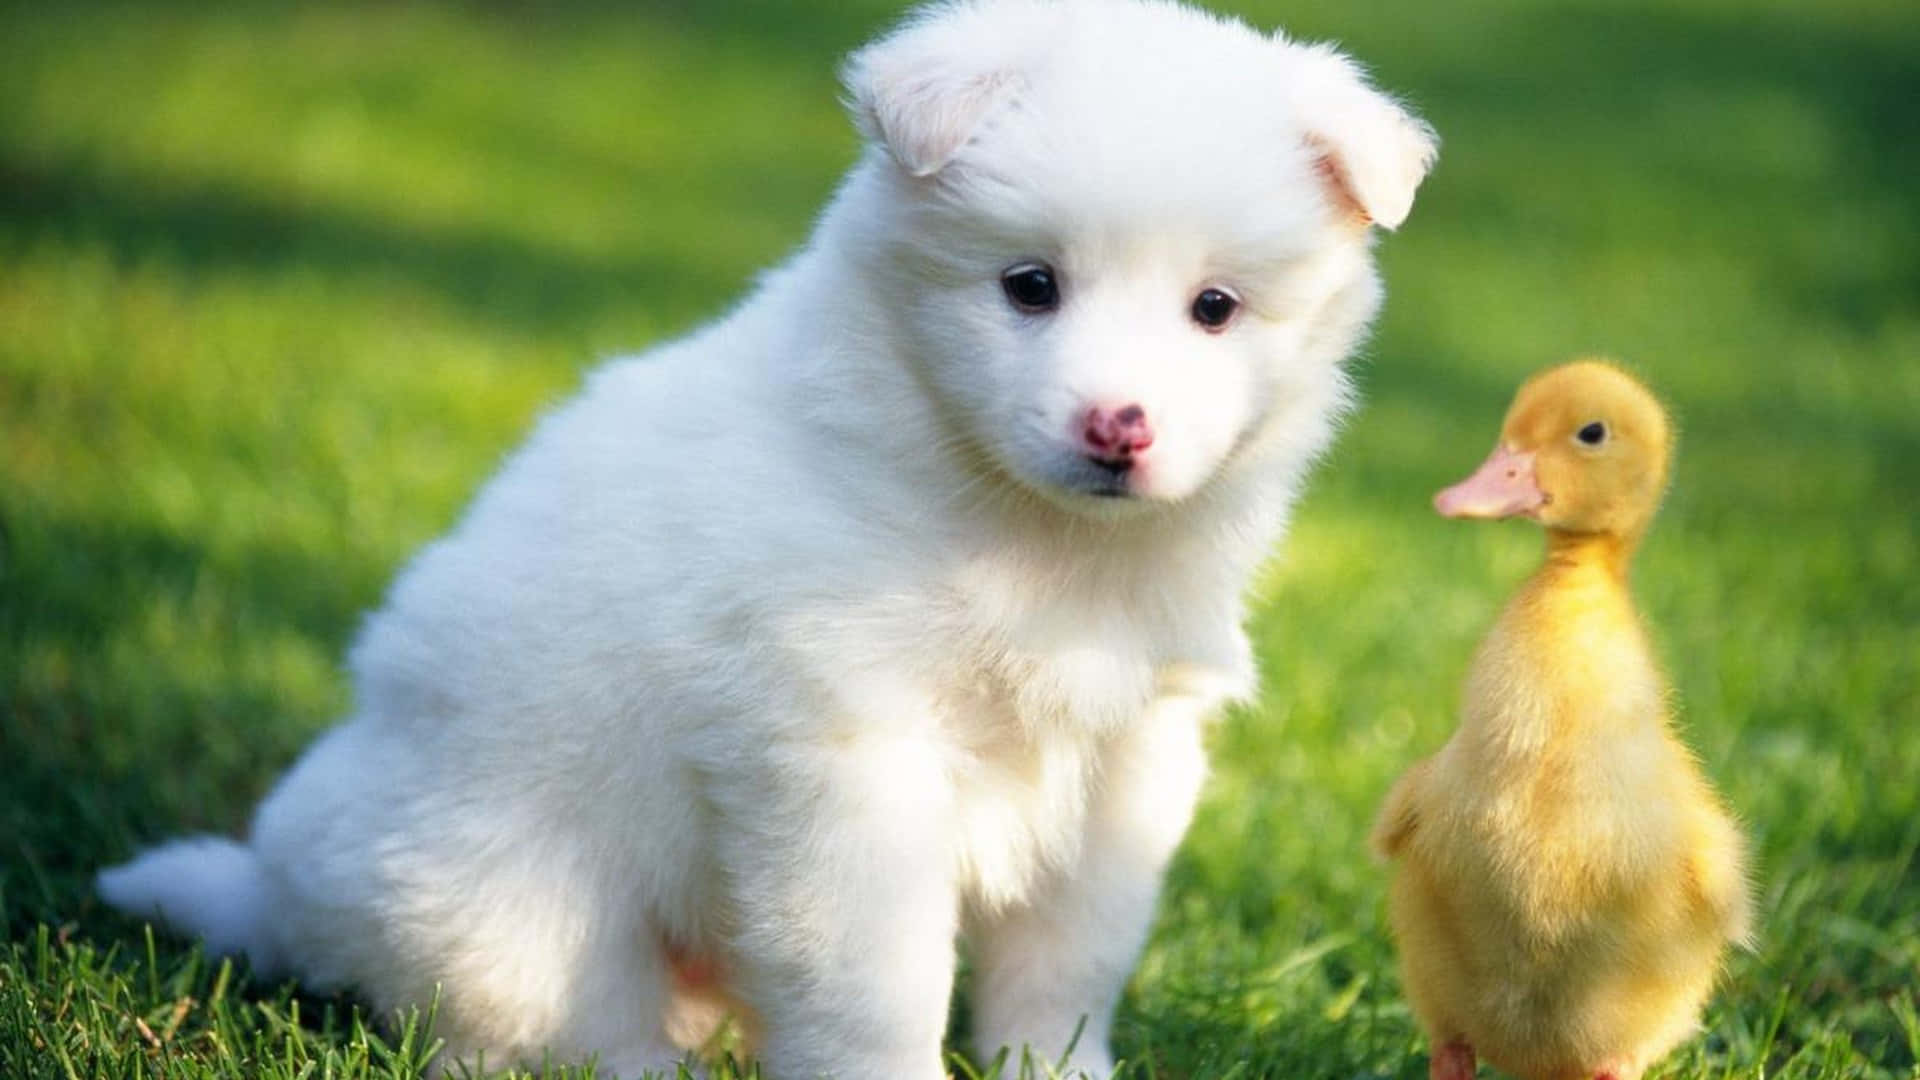 Puppy 4k ultra hd 16:10 wallpapers hd, desktop backgrounds 3840x2400,  images and pictures